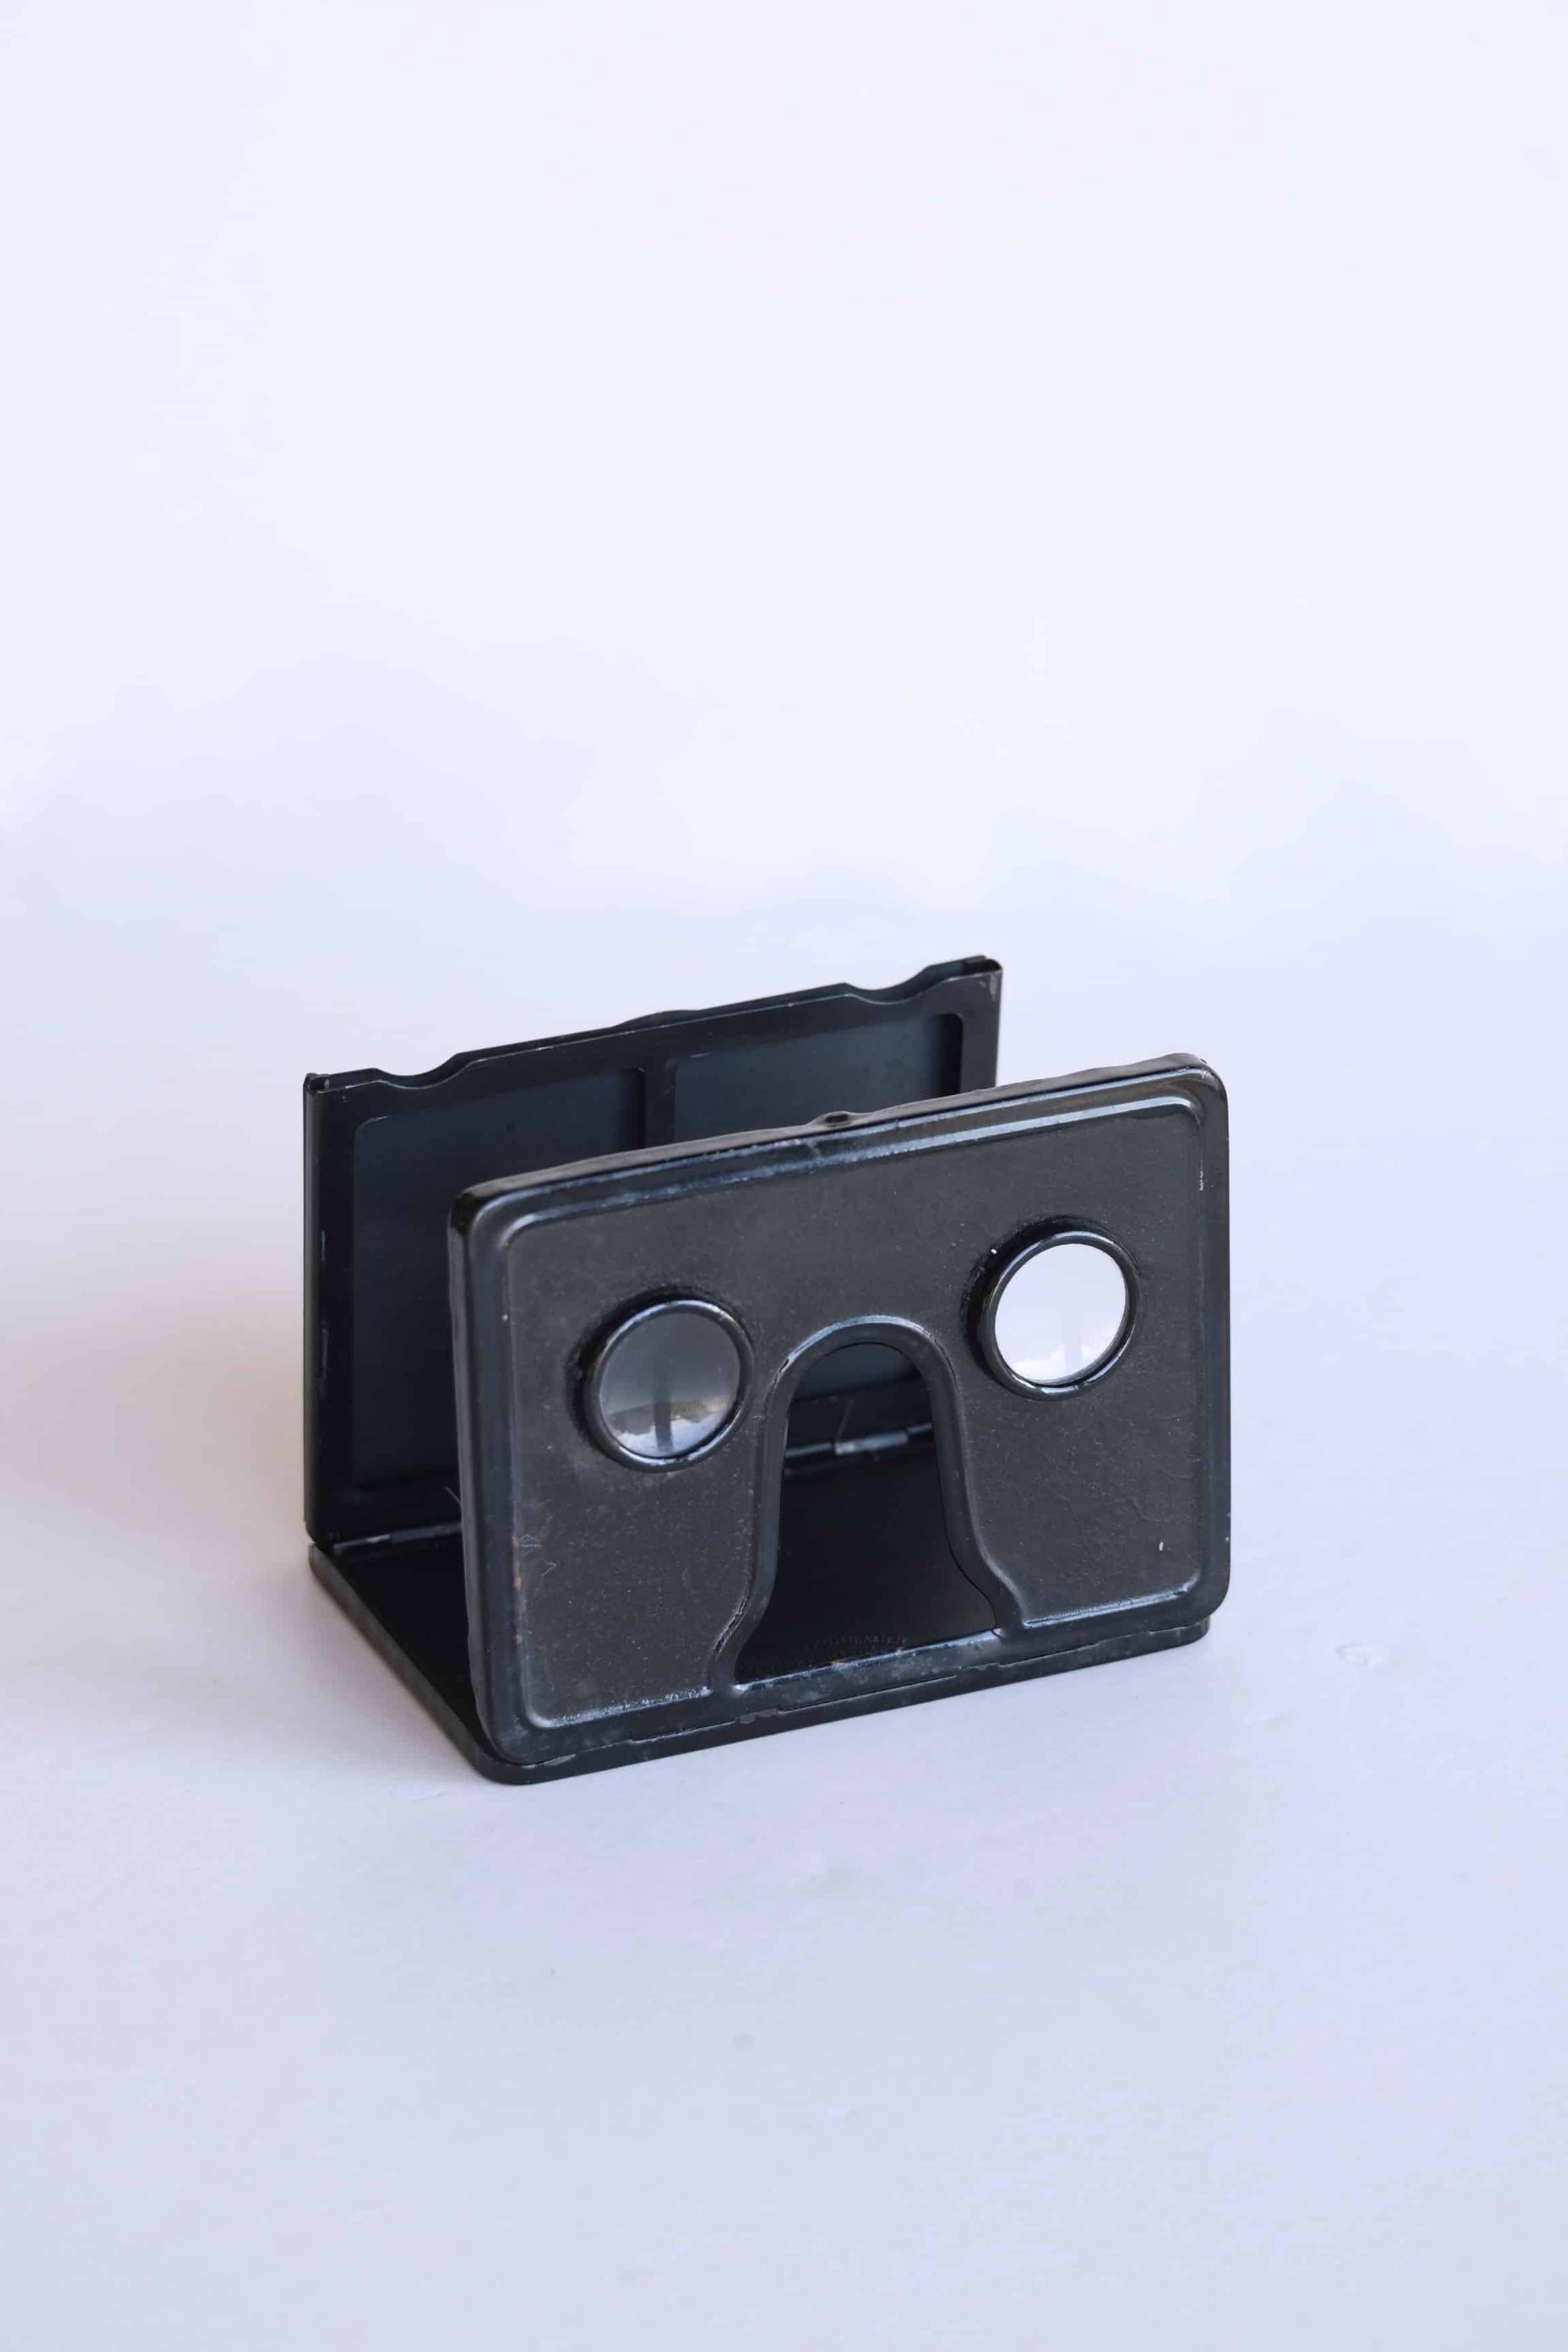 STEREO INDUPOR Folding 3D Viewer Stereoscope unfolded on white background